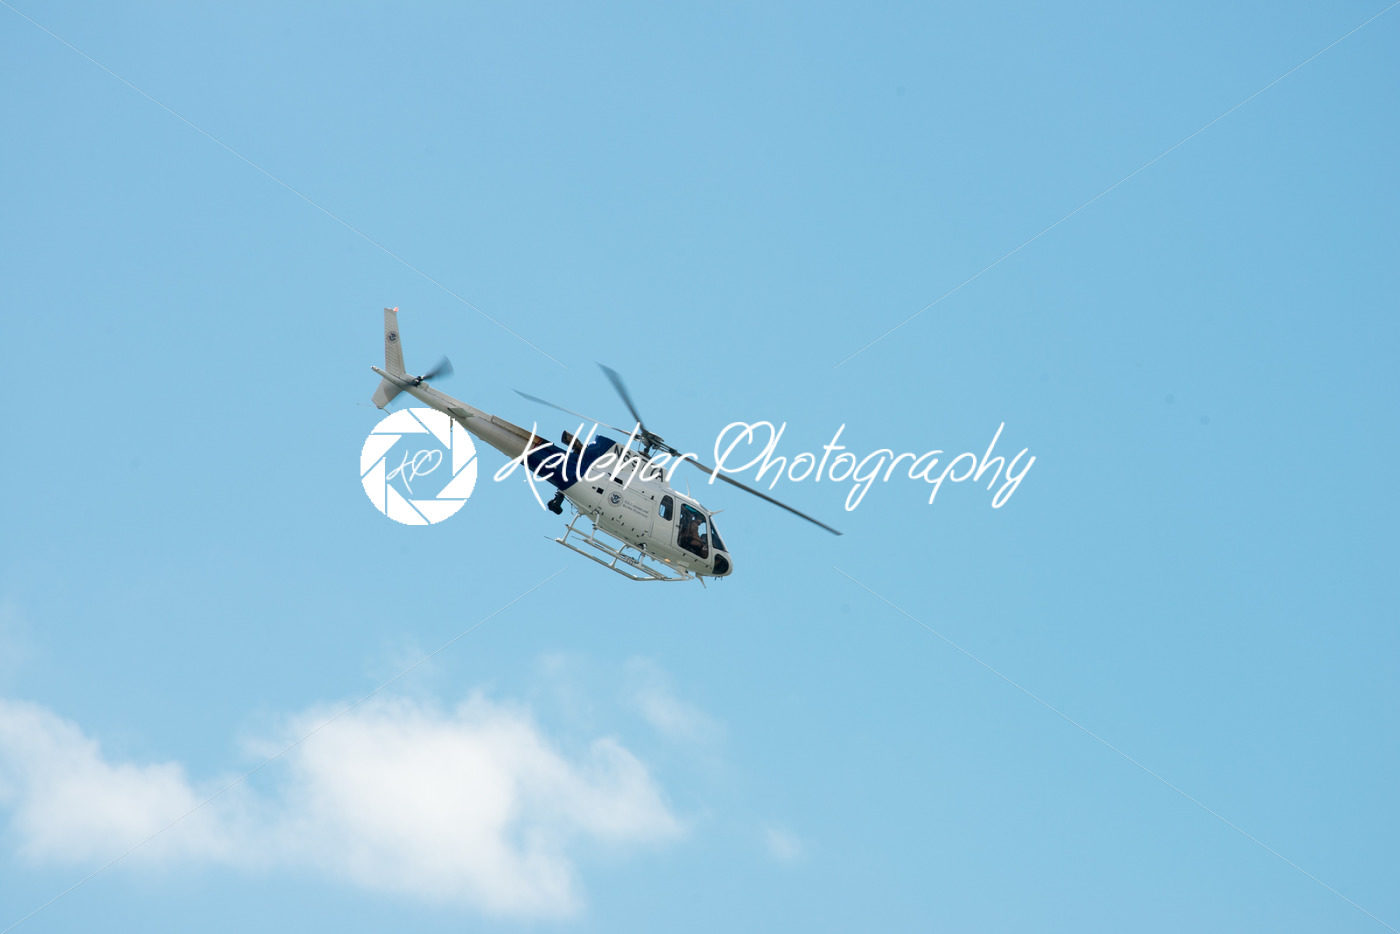 ATLANTIC CITY, NJ – AUGUST 17: US Customs and Border Protection Helicopter at Atlantic City Air Show on August 17, 2016 - Kelleher Photography Store